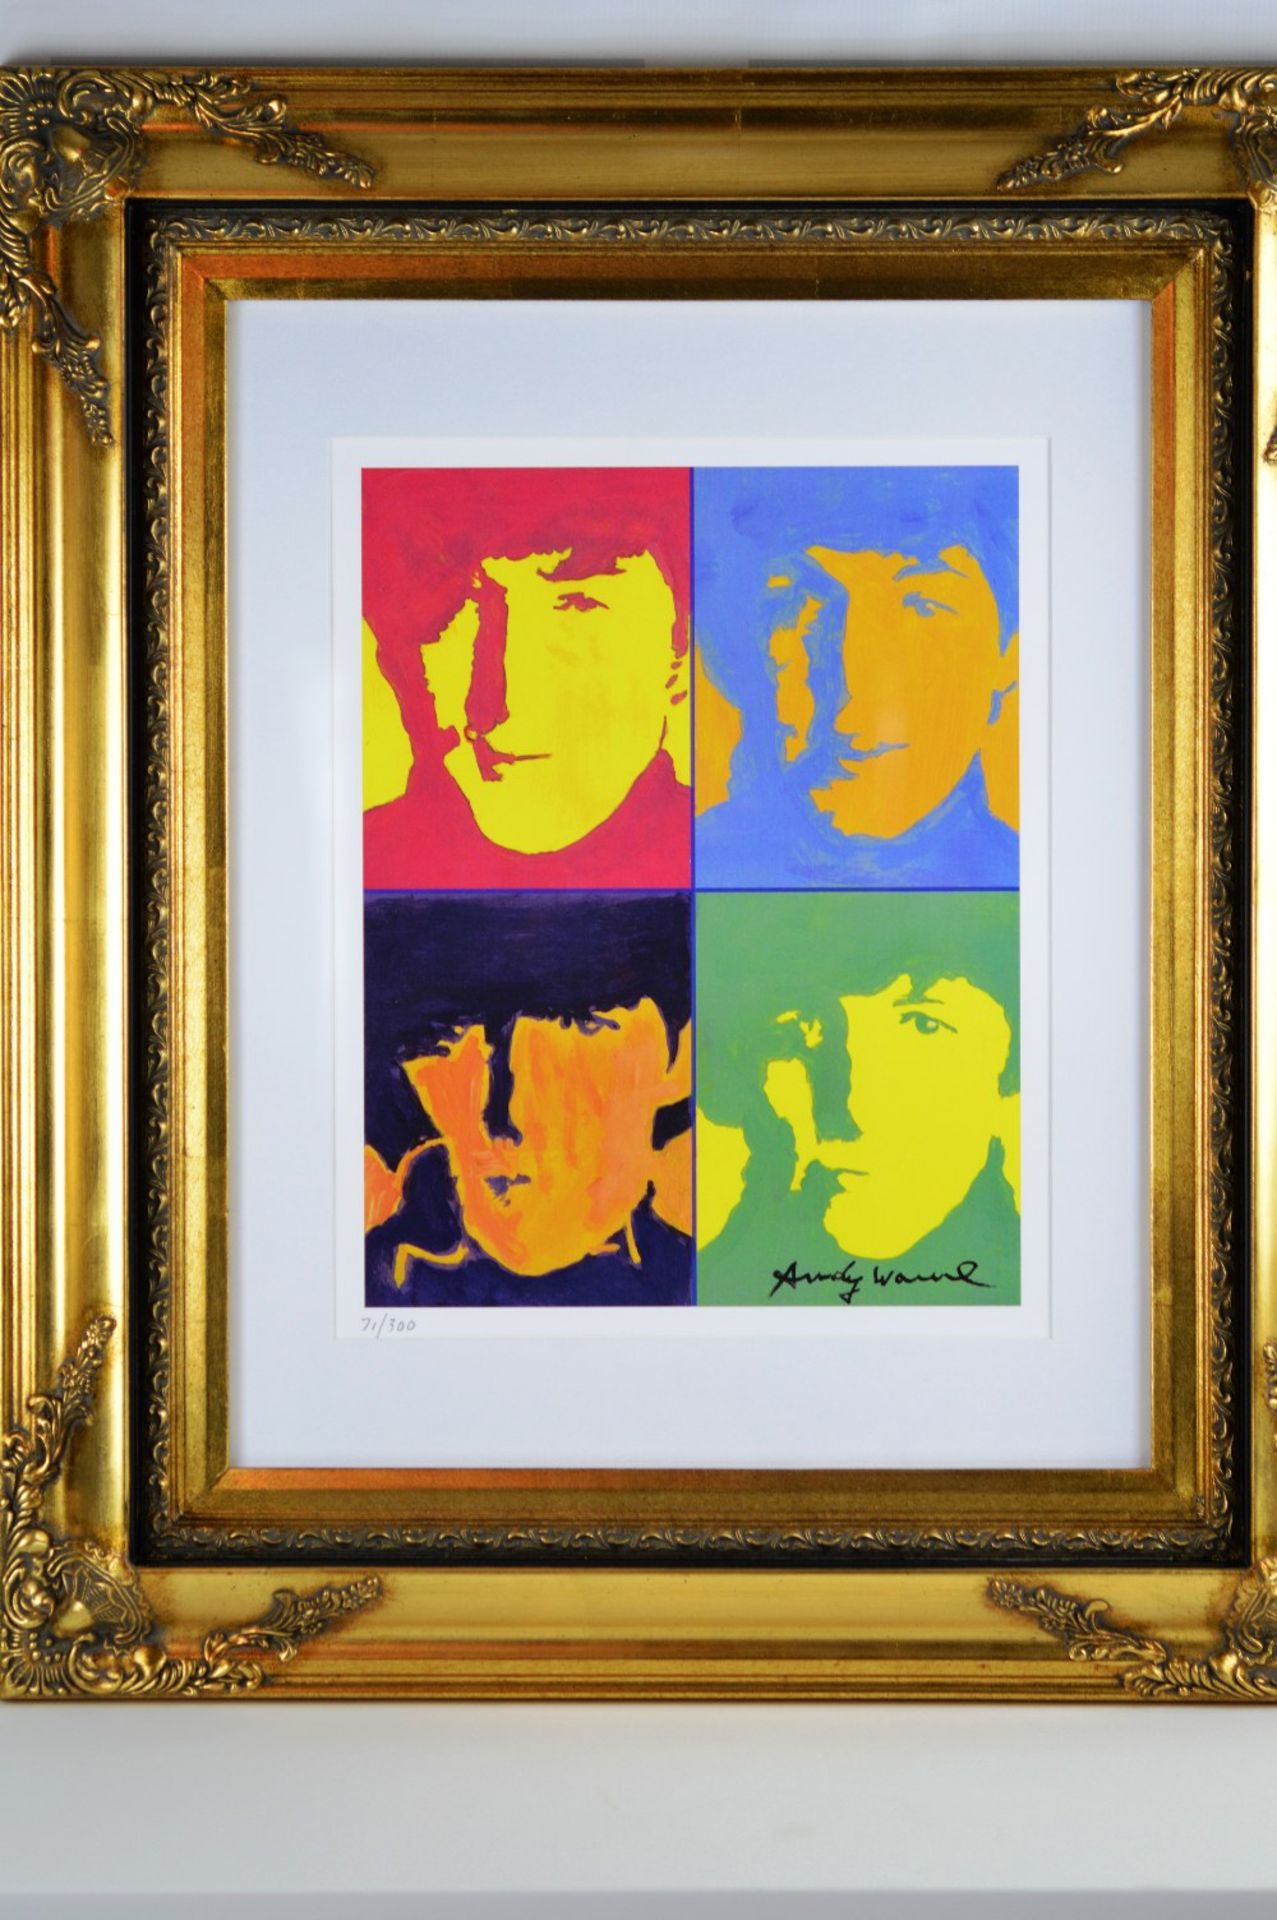 Andy Warhol Signed & Hand-Numberd Limited Edition "The Beatles" Lithograph Print 173/300 - Image 3 of 5